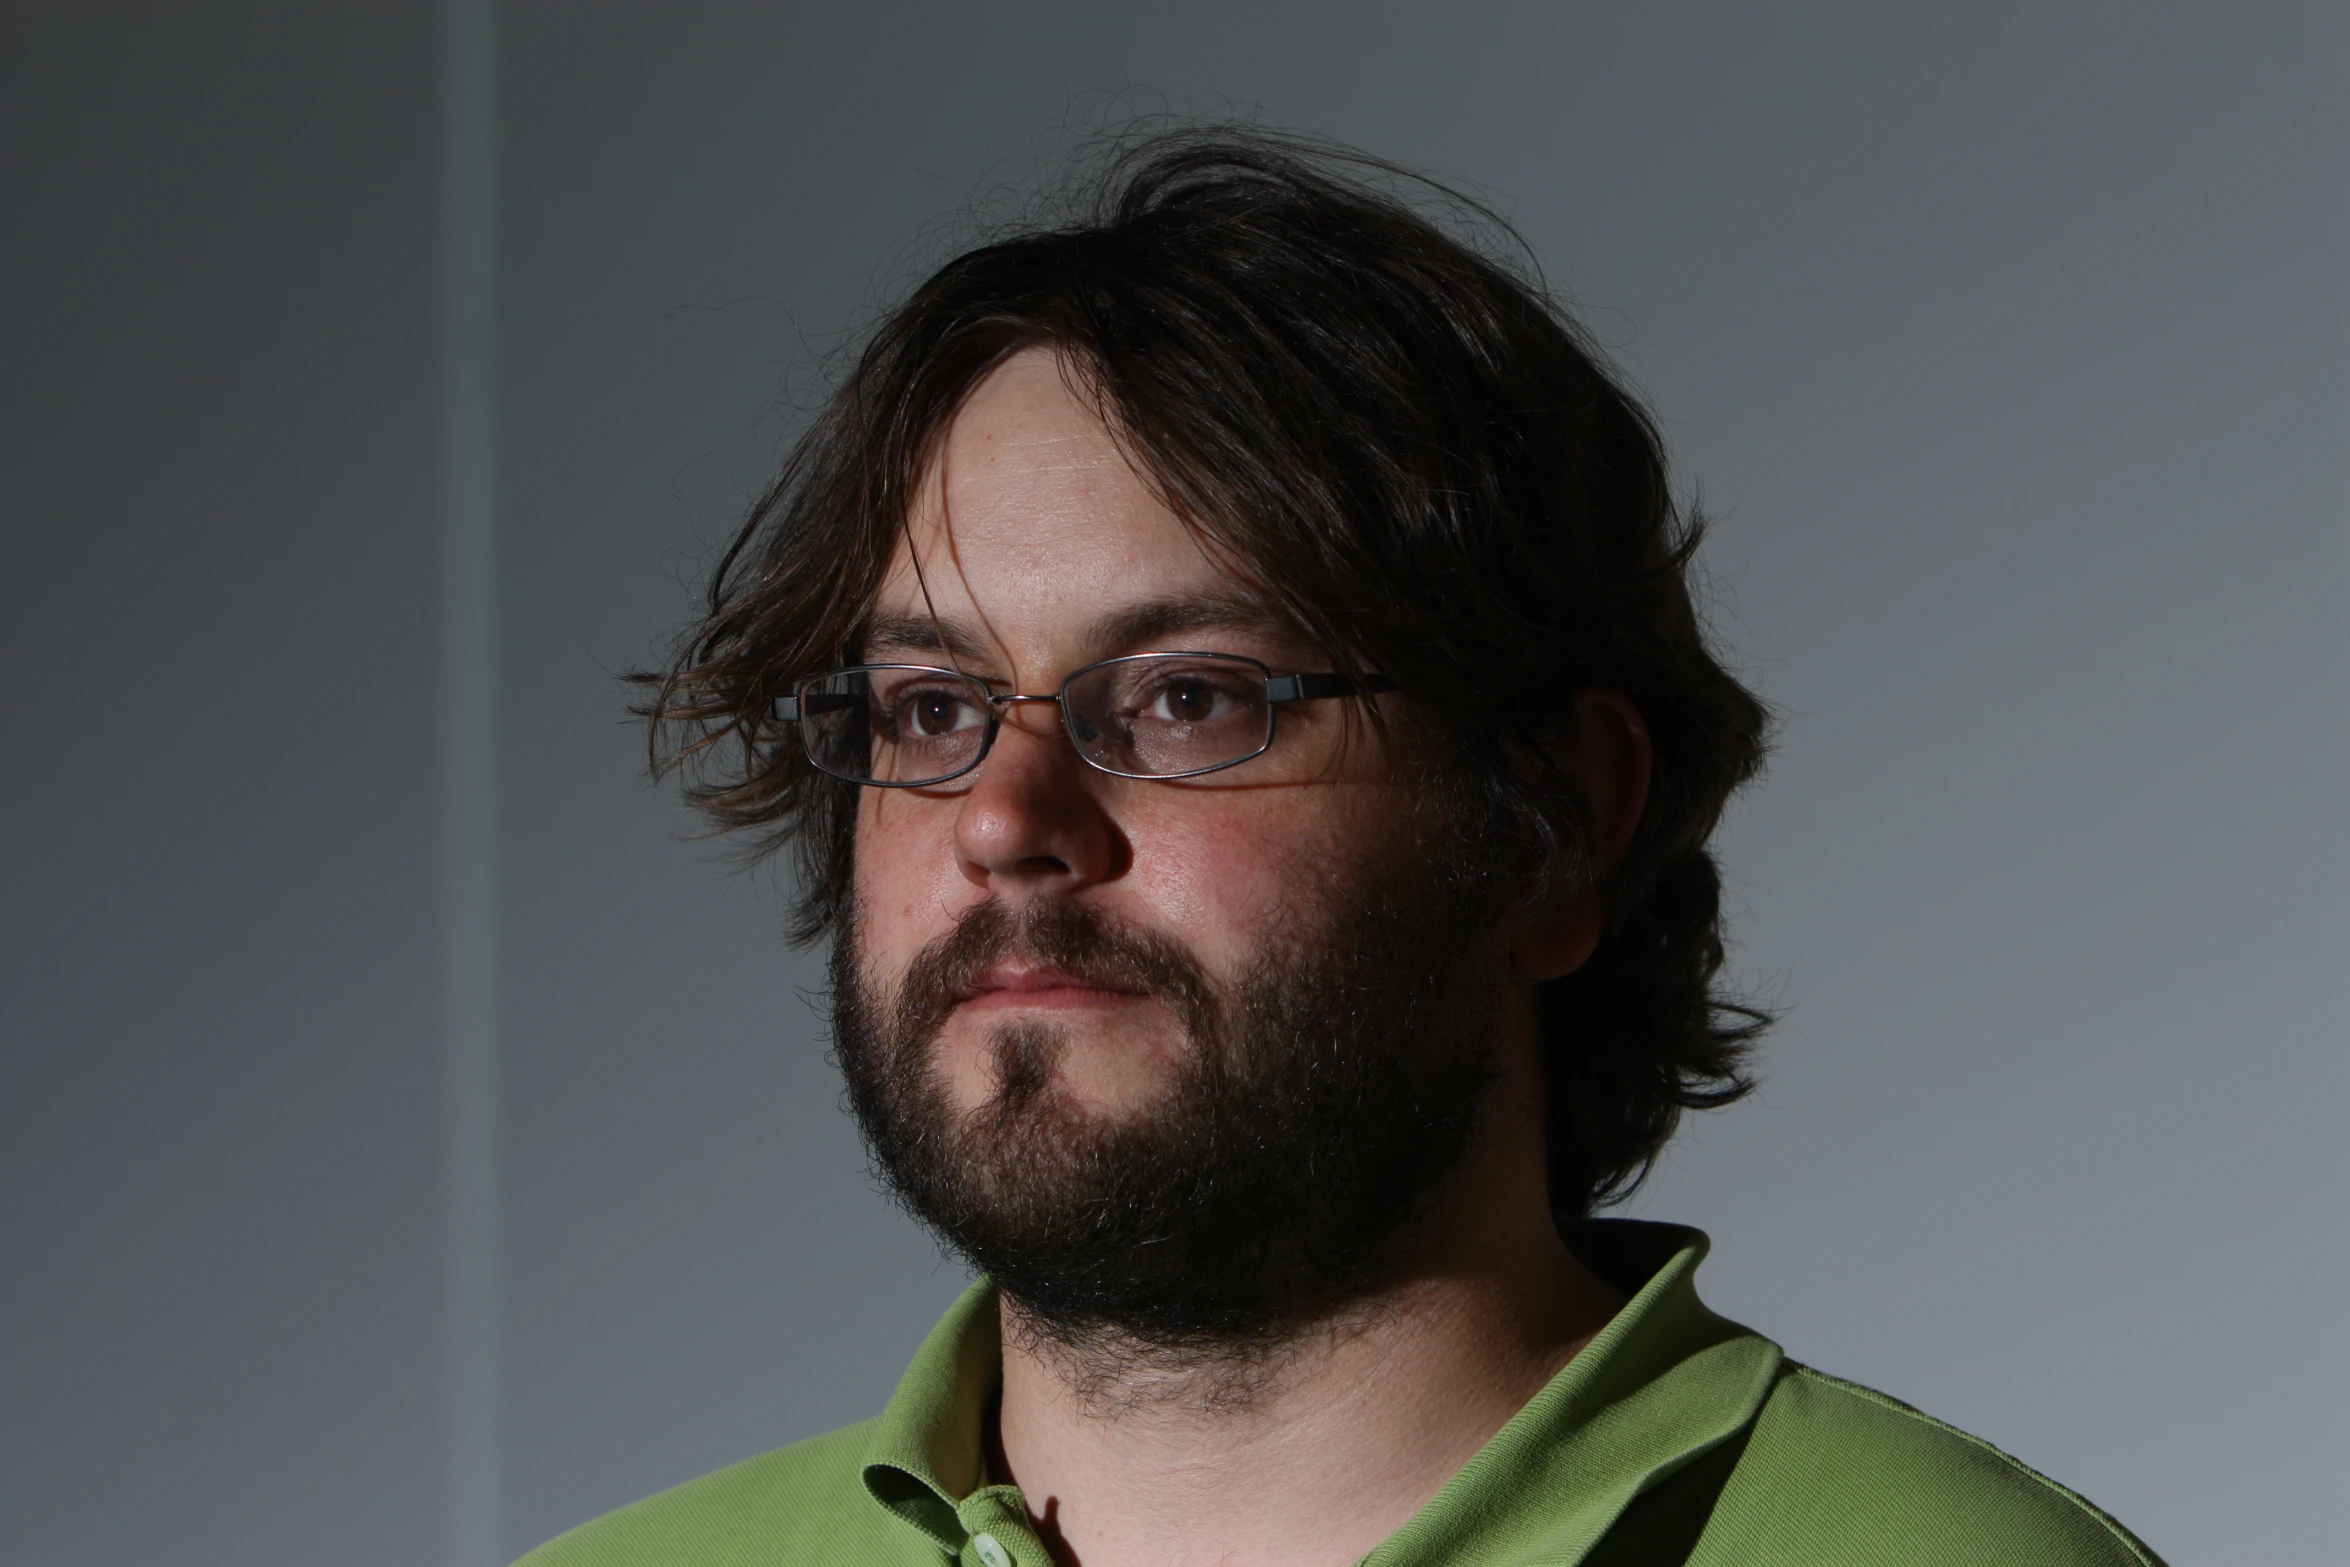 a bearded man wearing glasses and a green shirt